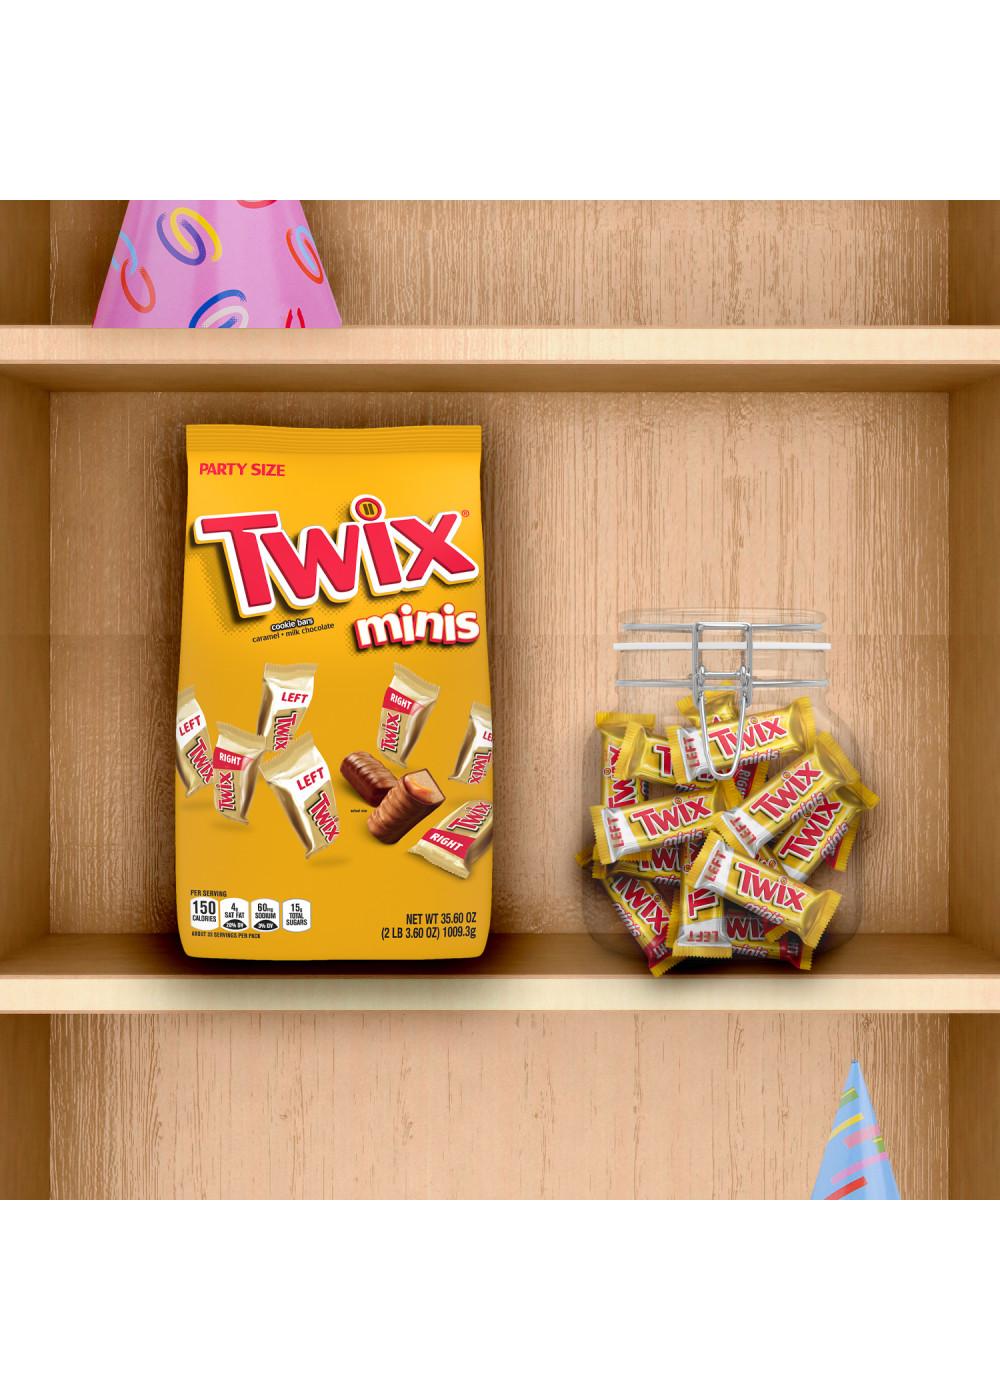 Twix Cookie Bars Minis Candy - Party Size; image 4 of 7